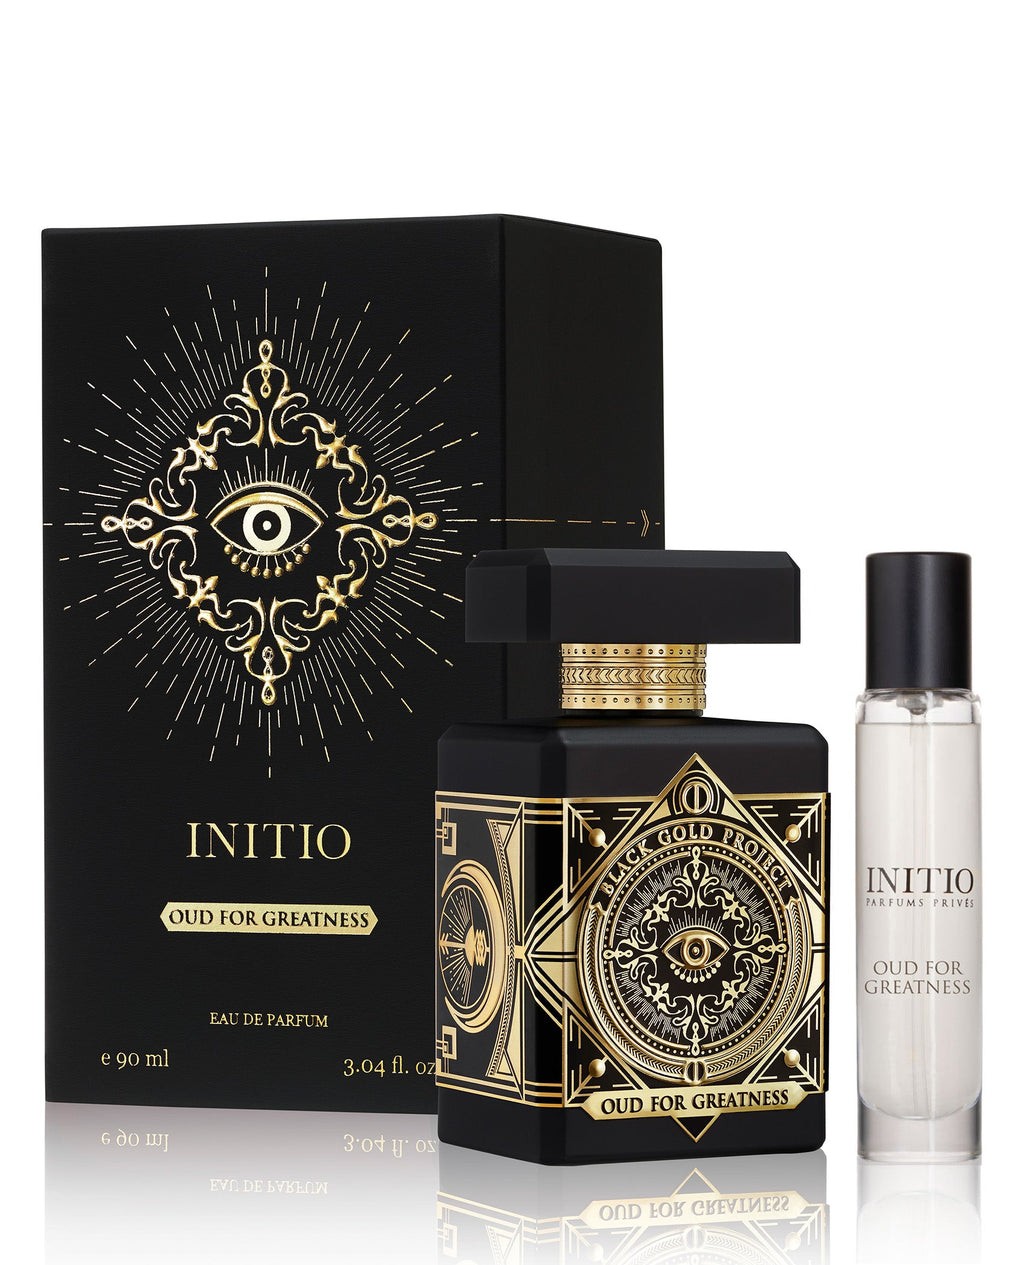 INITIO Privés OUD Parfums FOR – US GREATNESS SET